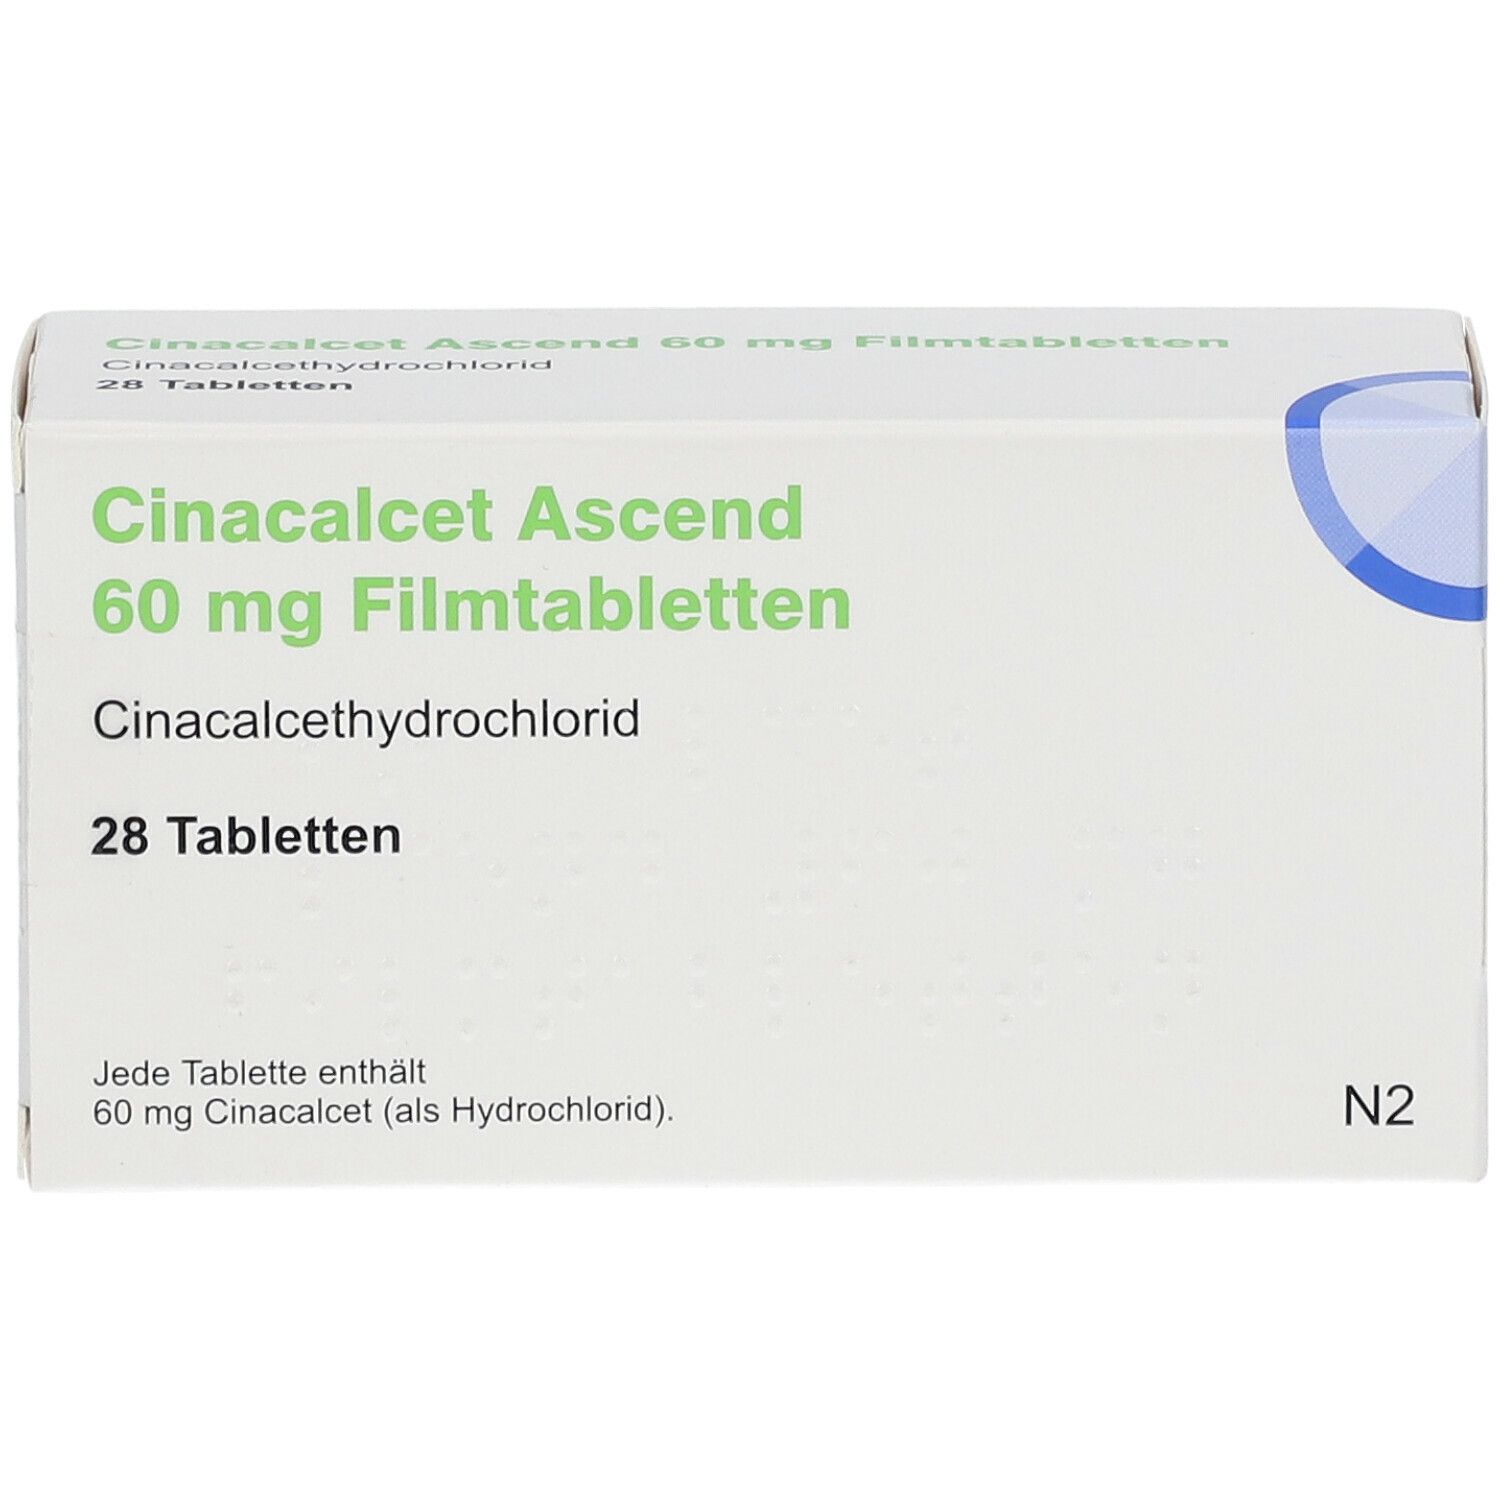 Cinacalcet Ascend 60 mg